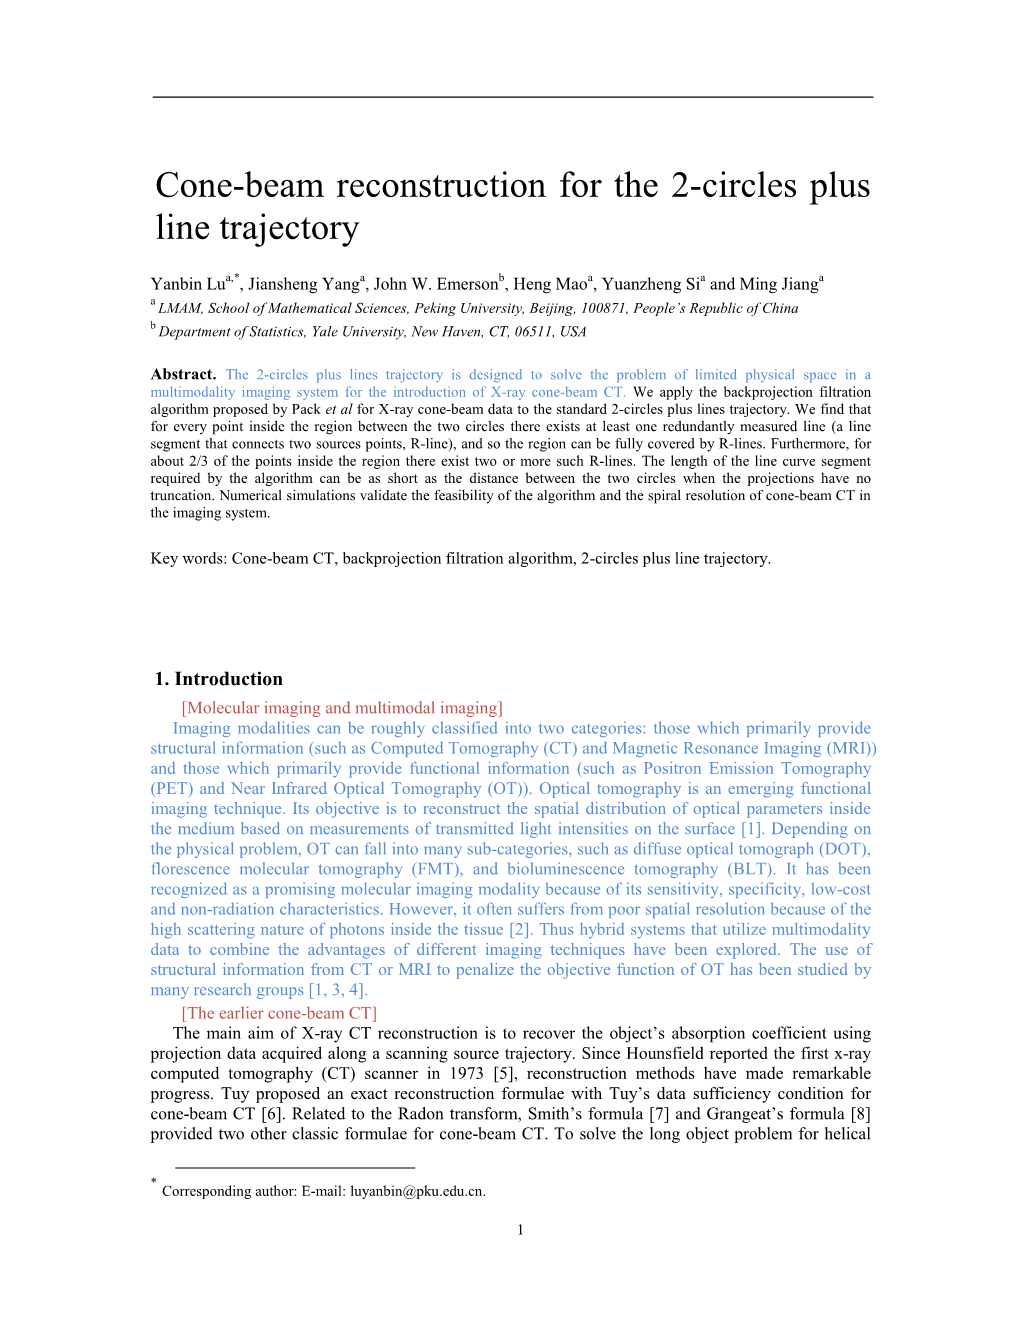 Cone-Beam Reconstruction for the 2-Circles Plus Line Trajectory